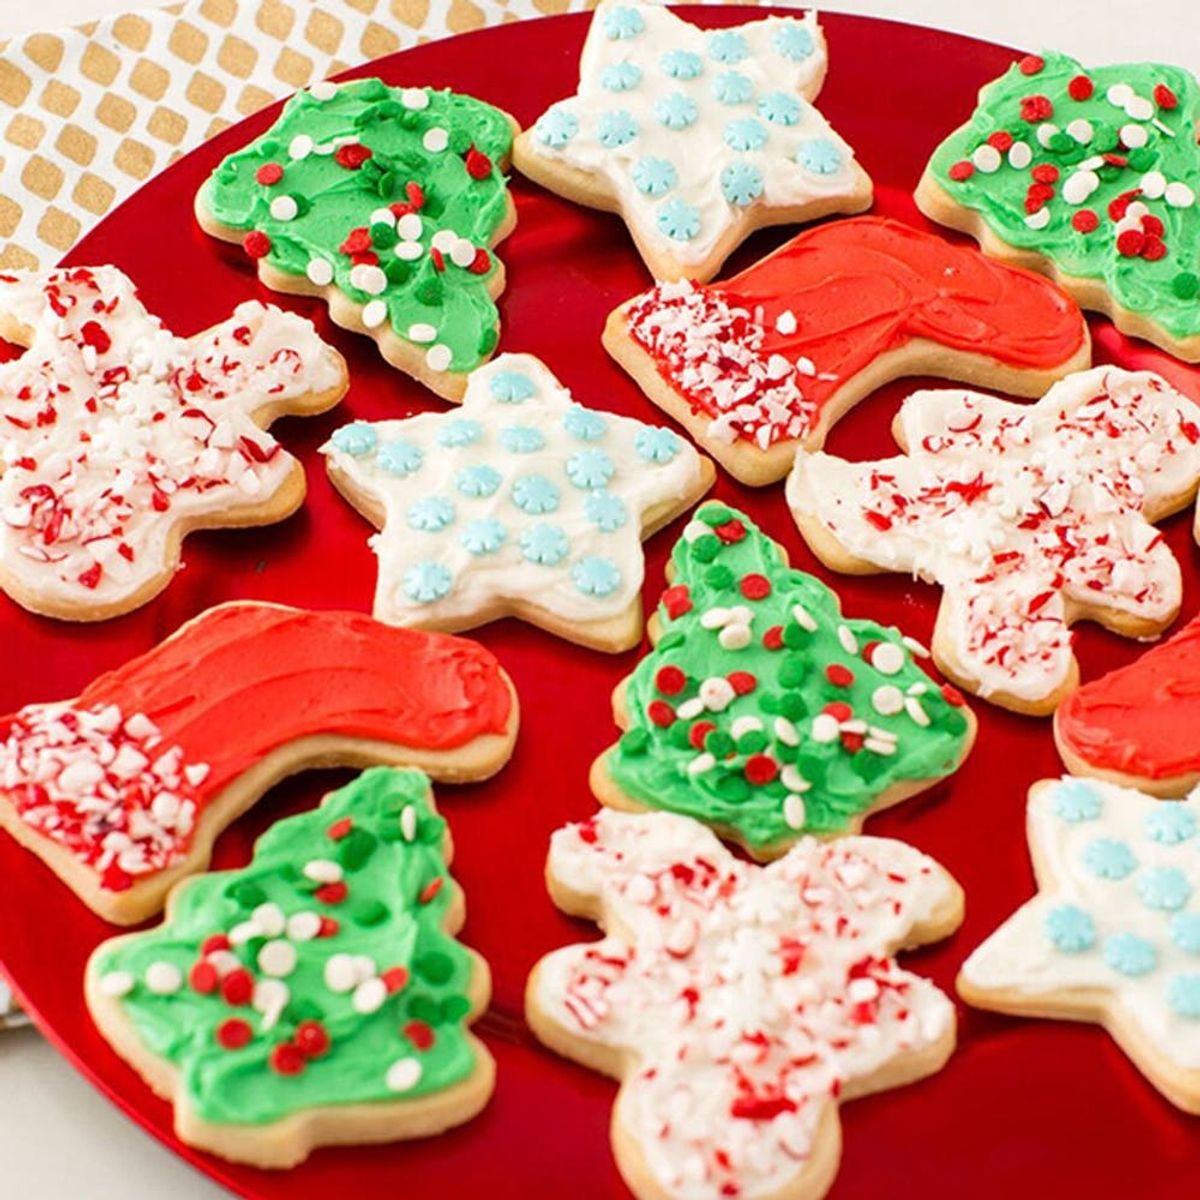 Share Your Best Christmas Cookie Recipe and Win $250!